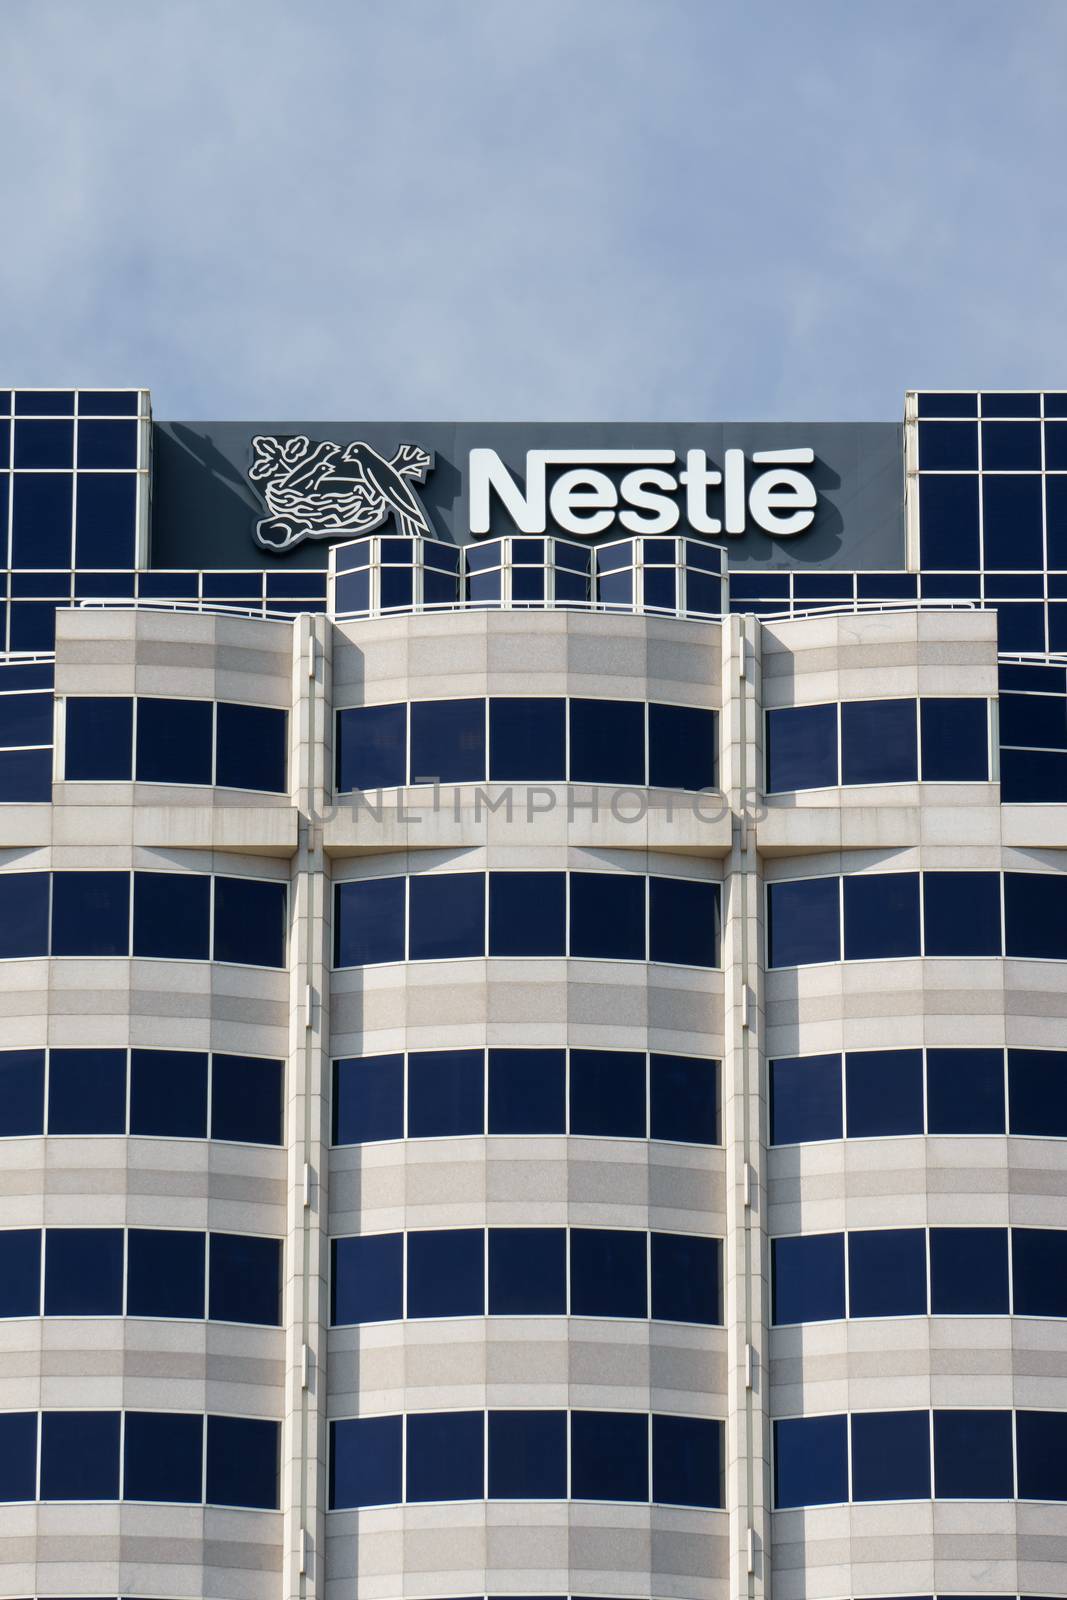 GLENDALE, CA/USA - OCTOBER 24, 2105: Nestle USA headquarters. Nestle is a Swiss transnational food and beverage company and ranked on the Fortune Global 500.